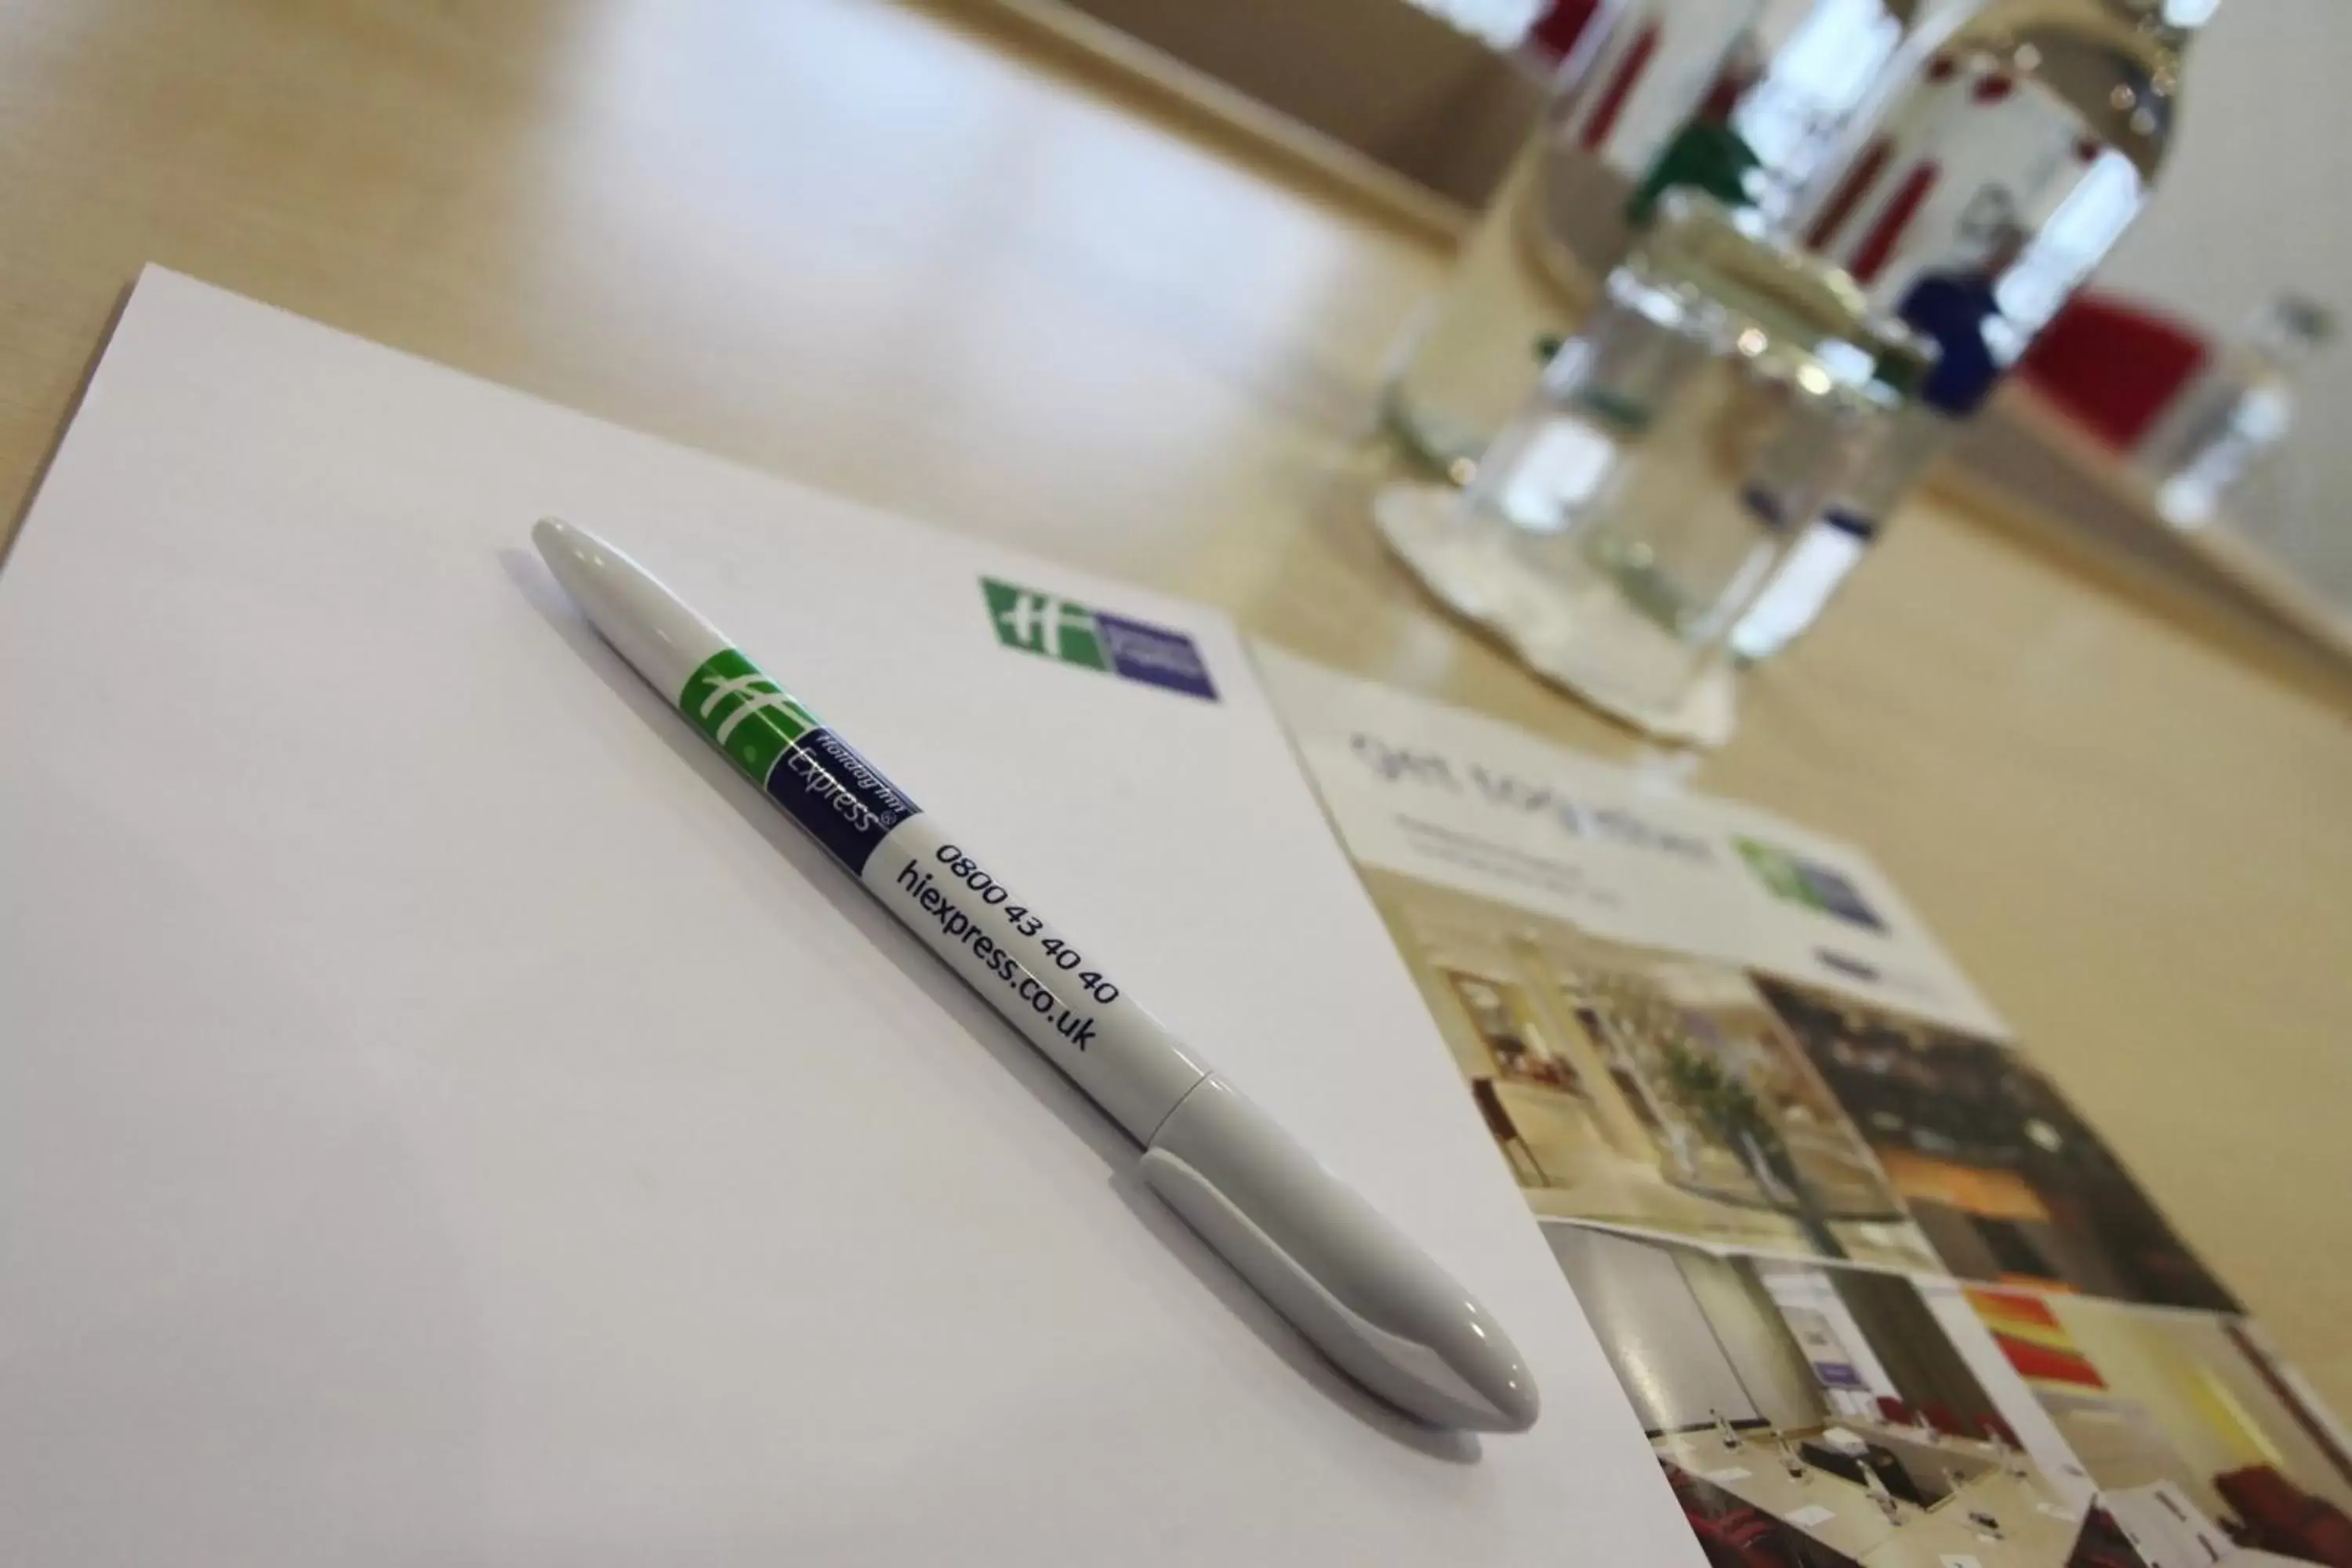 Meeting/conference room in Holiday Inn Express Birmingham Redditch, an IHG Hotel